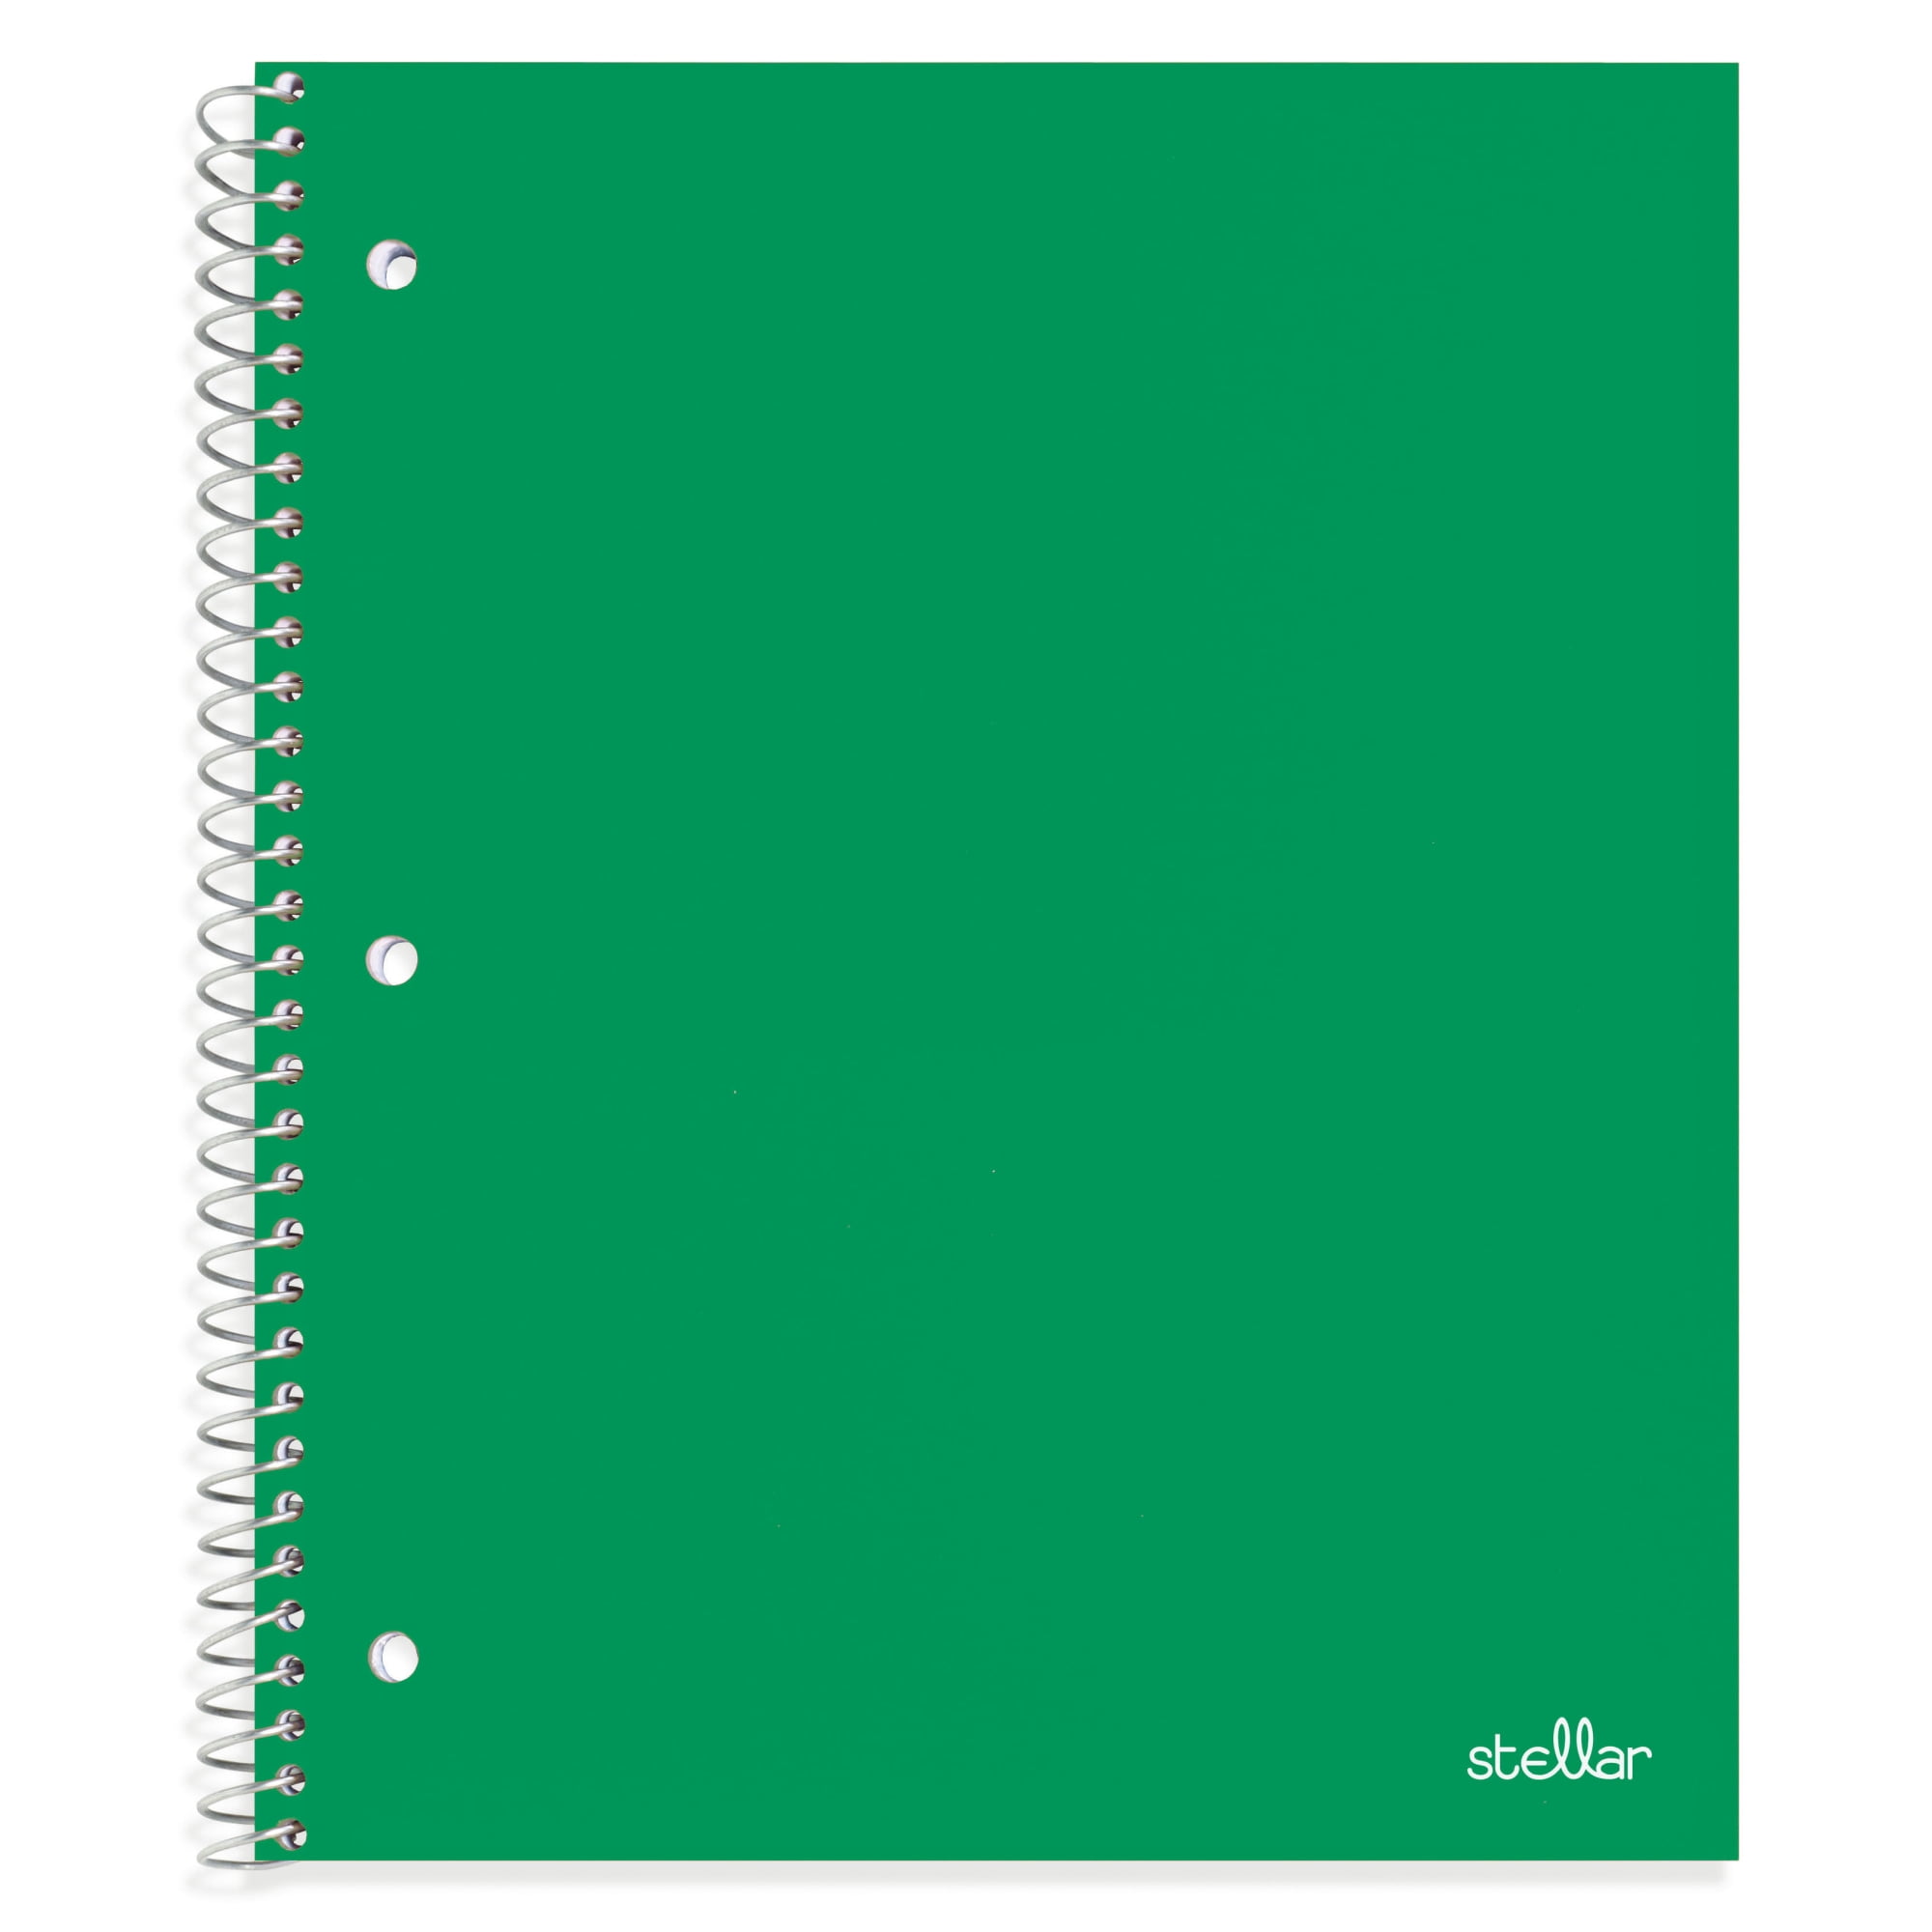 Office Depot Brand Stellar Notebook With Spine Cover 6 x 9 12 3 Subject  College Ruled 120 Sheets Black - Office Depot